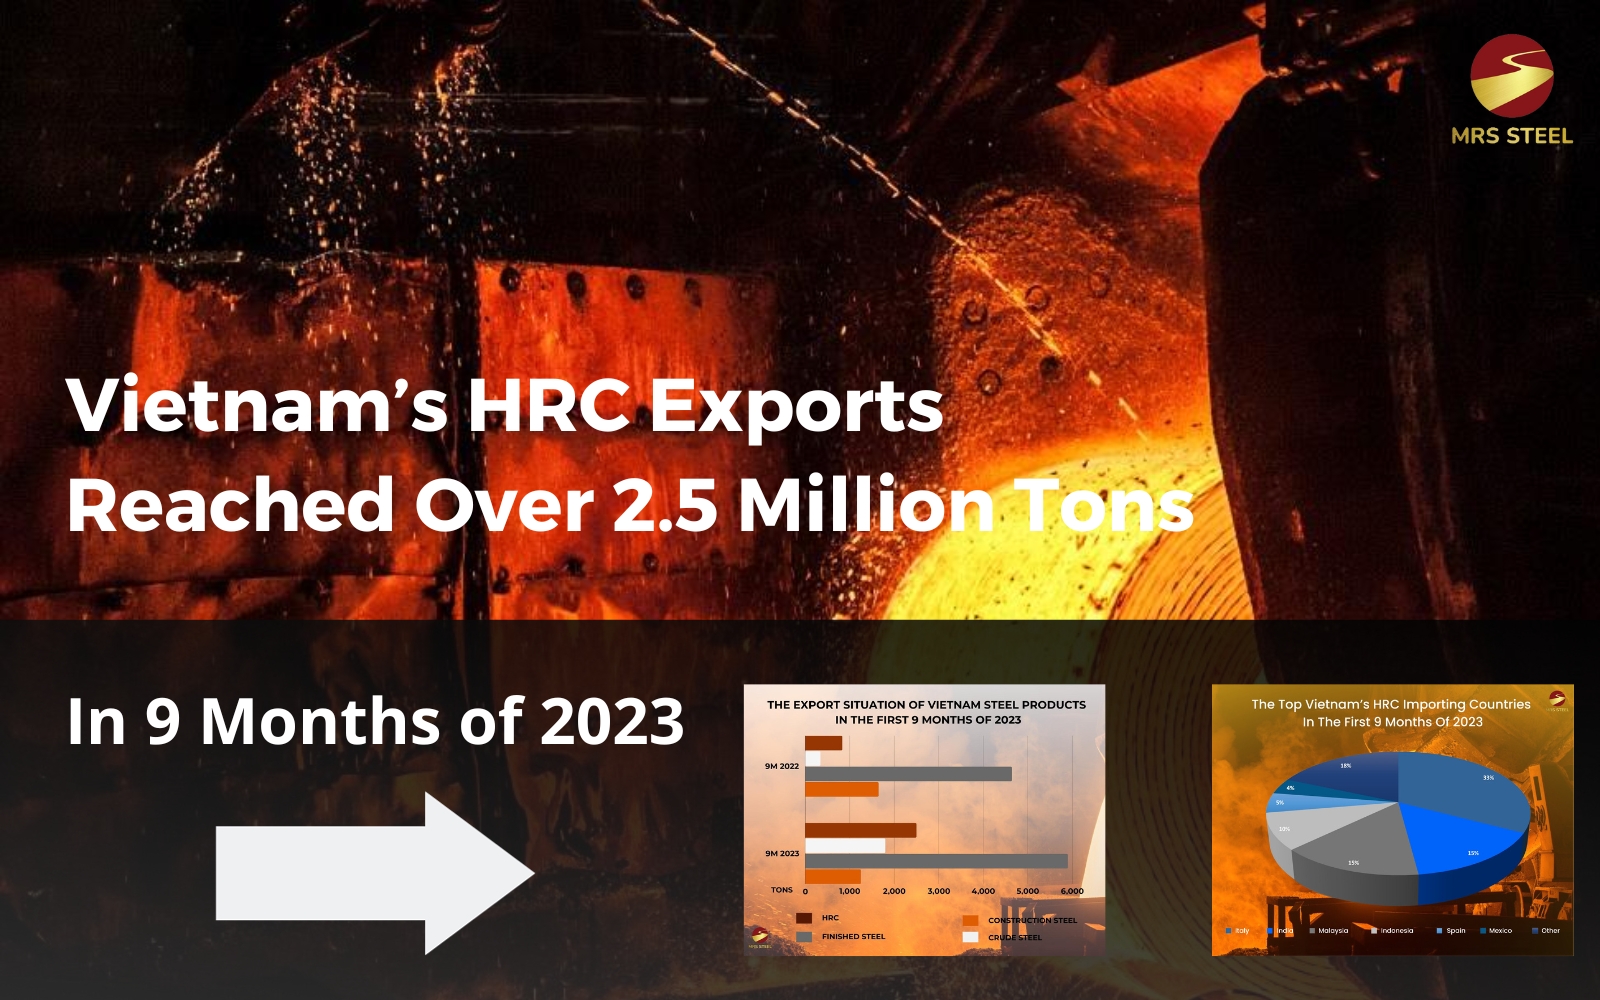 Vietnam’s HRC exports reached over 2.5 million tons in the first 9 months of 2023